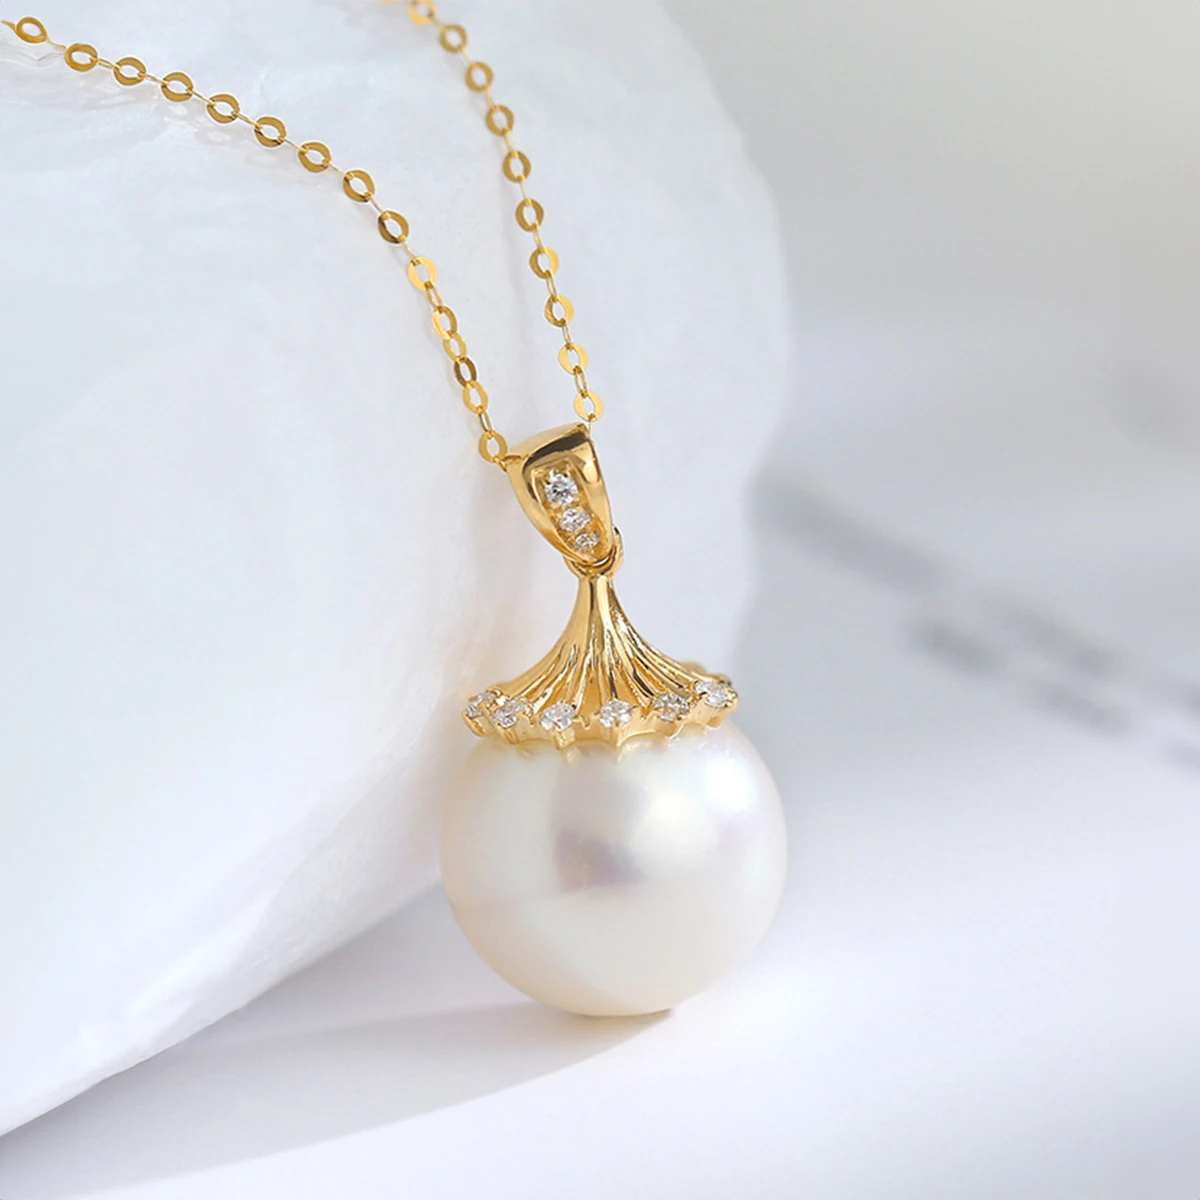 Szjinao 100% AU750 18K Gold Natrual Fresh Water Pearl Necklace With Certificate Women Pendant Jewelry Luxury Elegant Gift Female